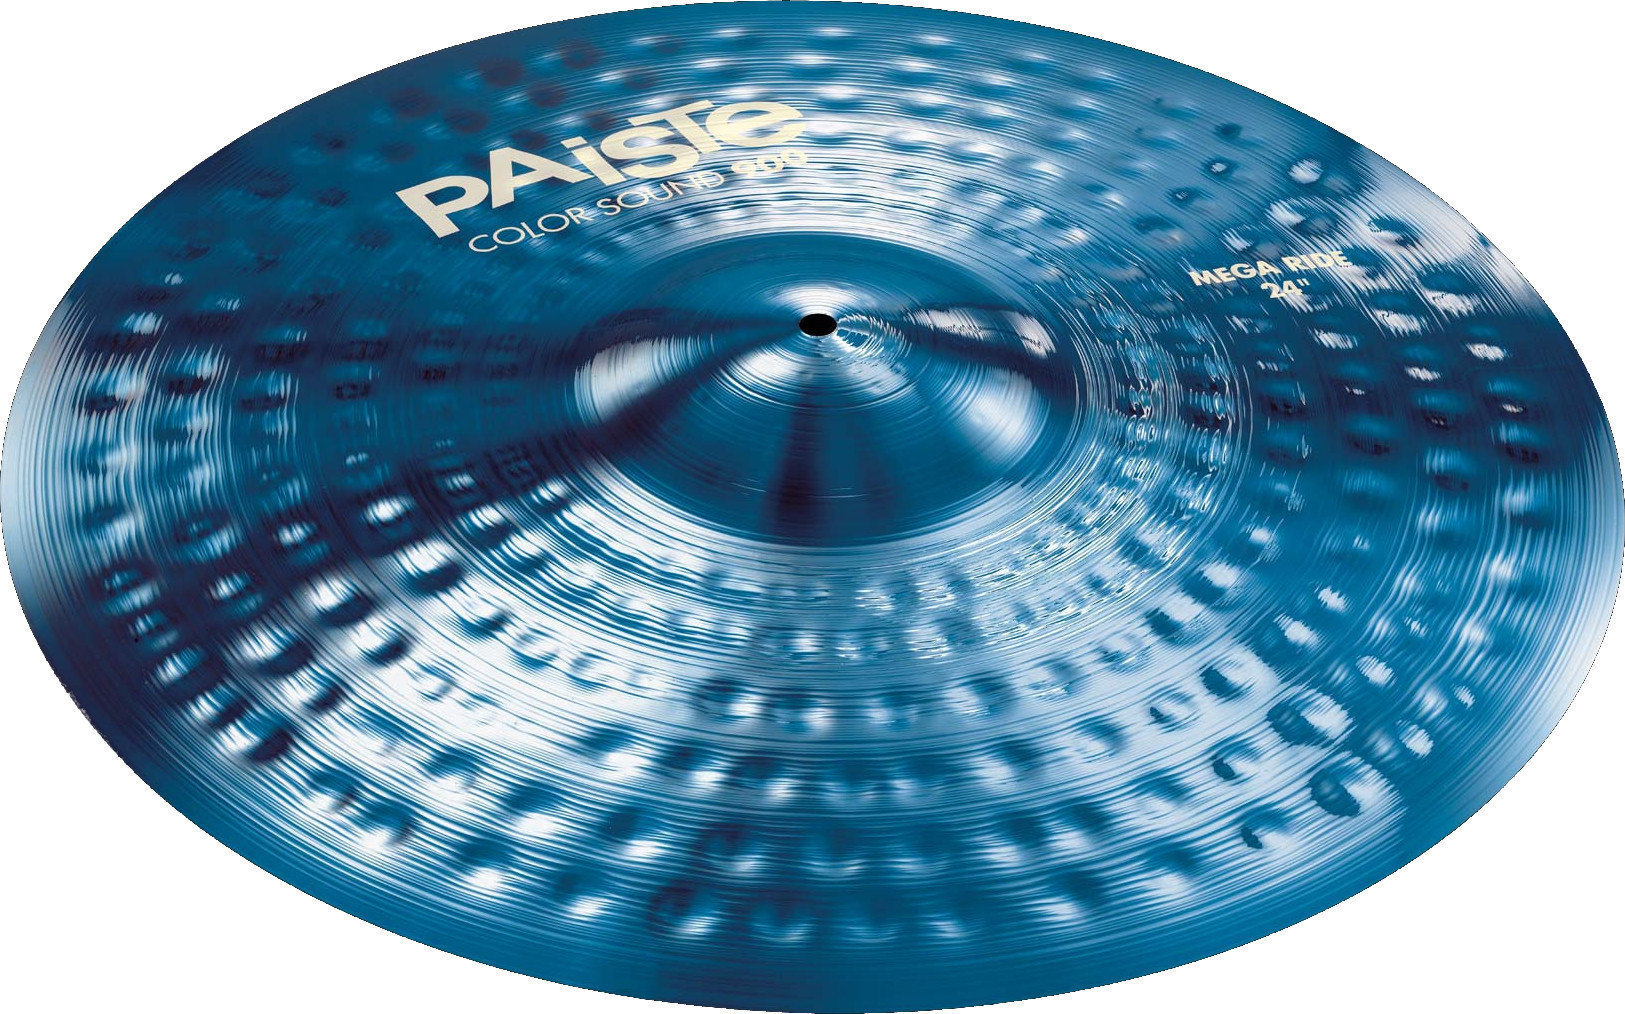 Ride Cymbal Paiste Color Sound 900  Mega Ride Cymbal 24" Blå